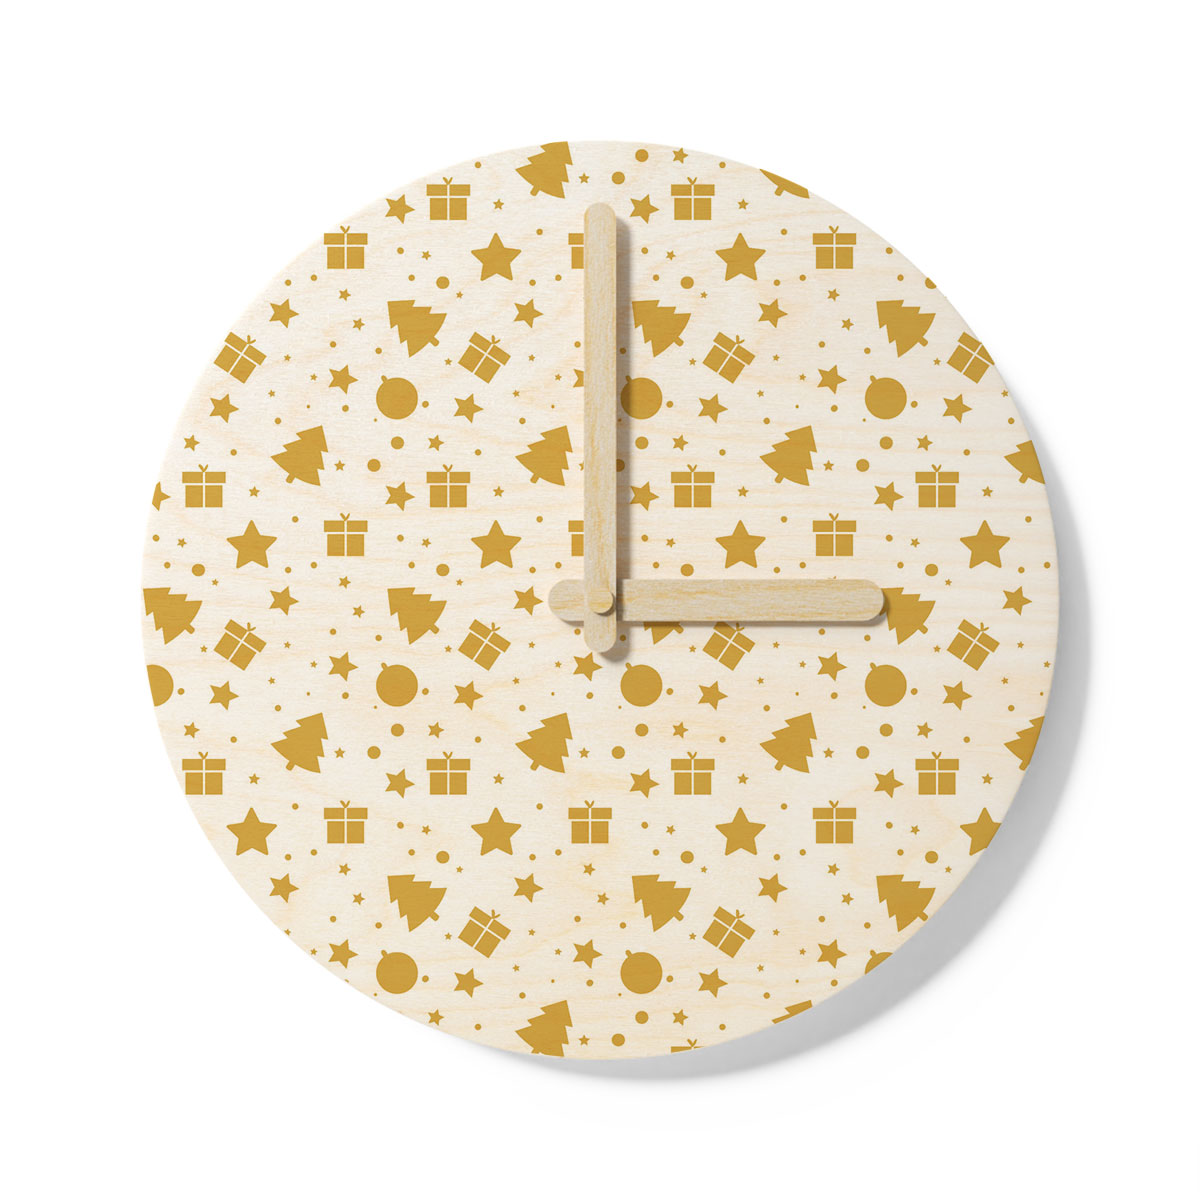 Christmas Gifts, Baudles And Pine Tree Silhouette Filled In Gold Color Pattern Wooden Wall Clock